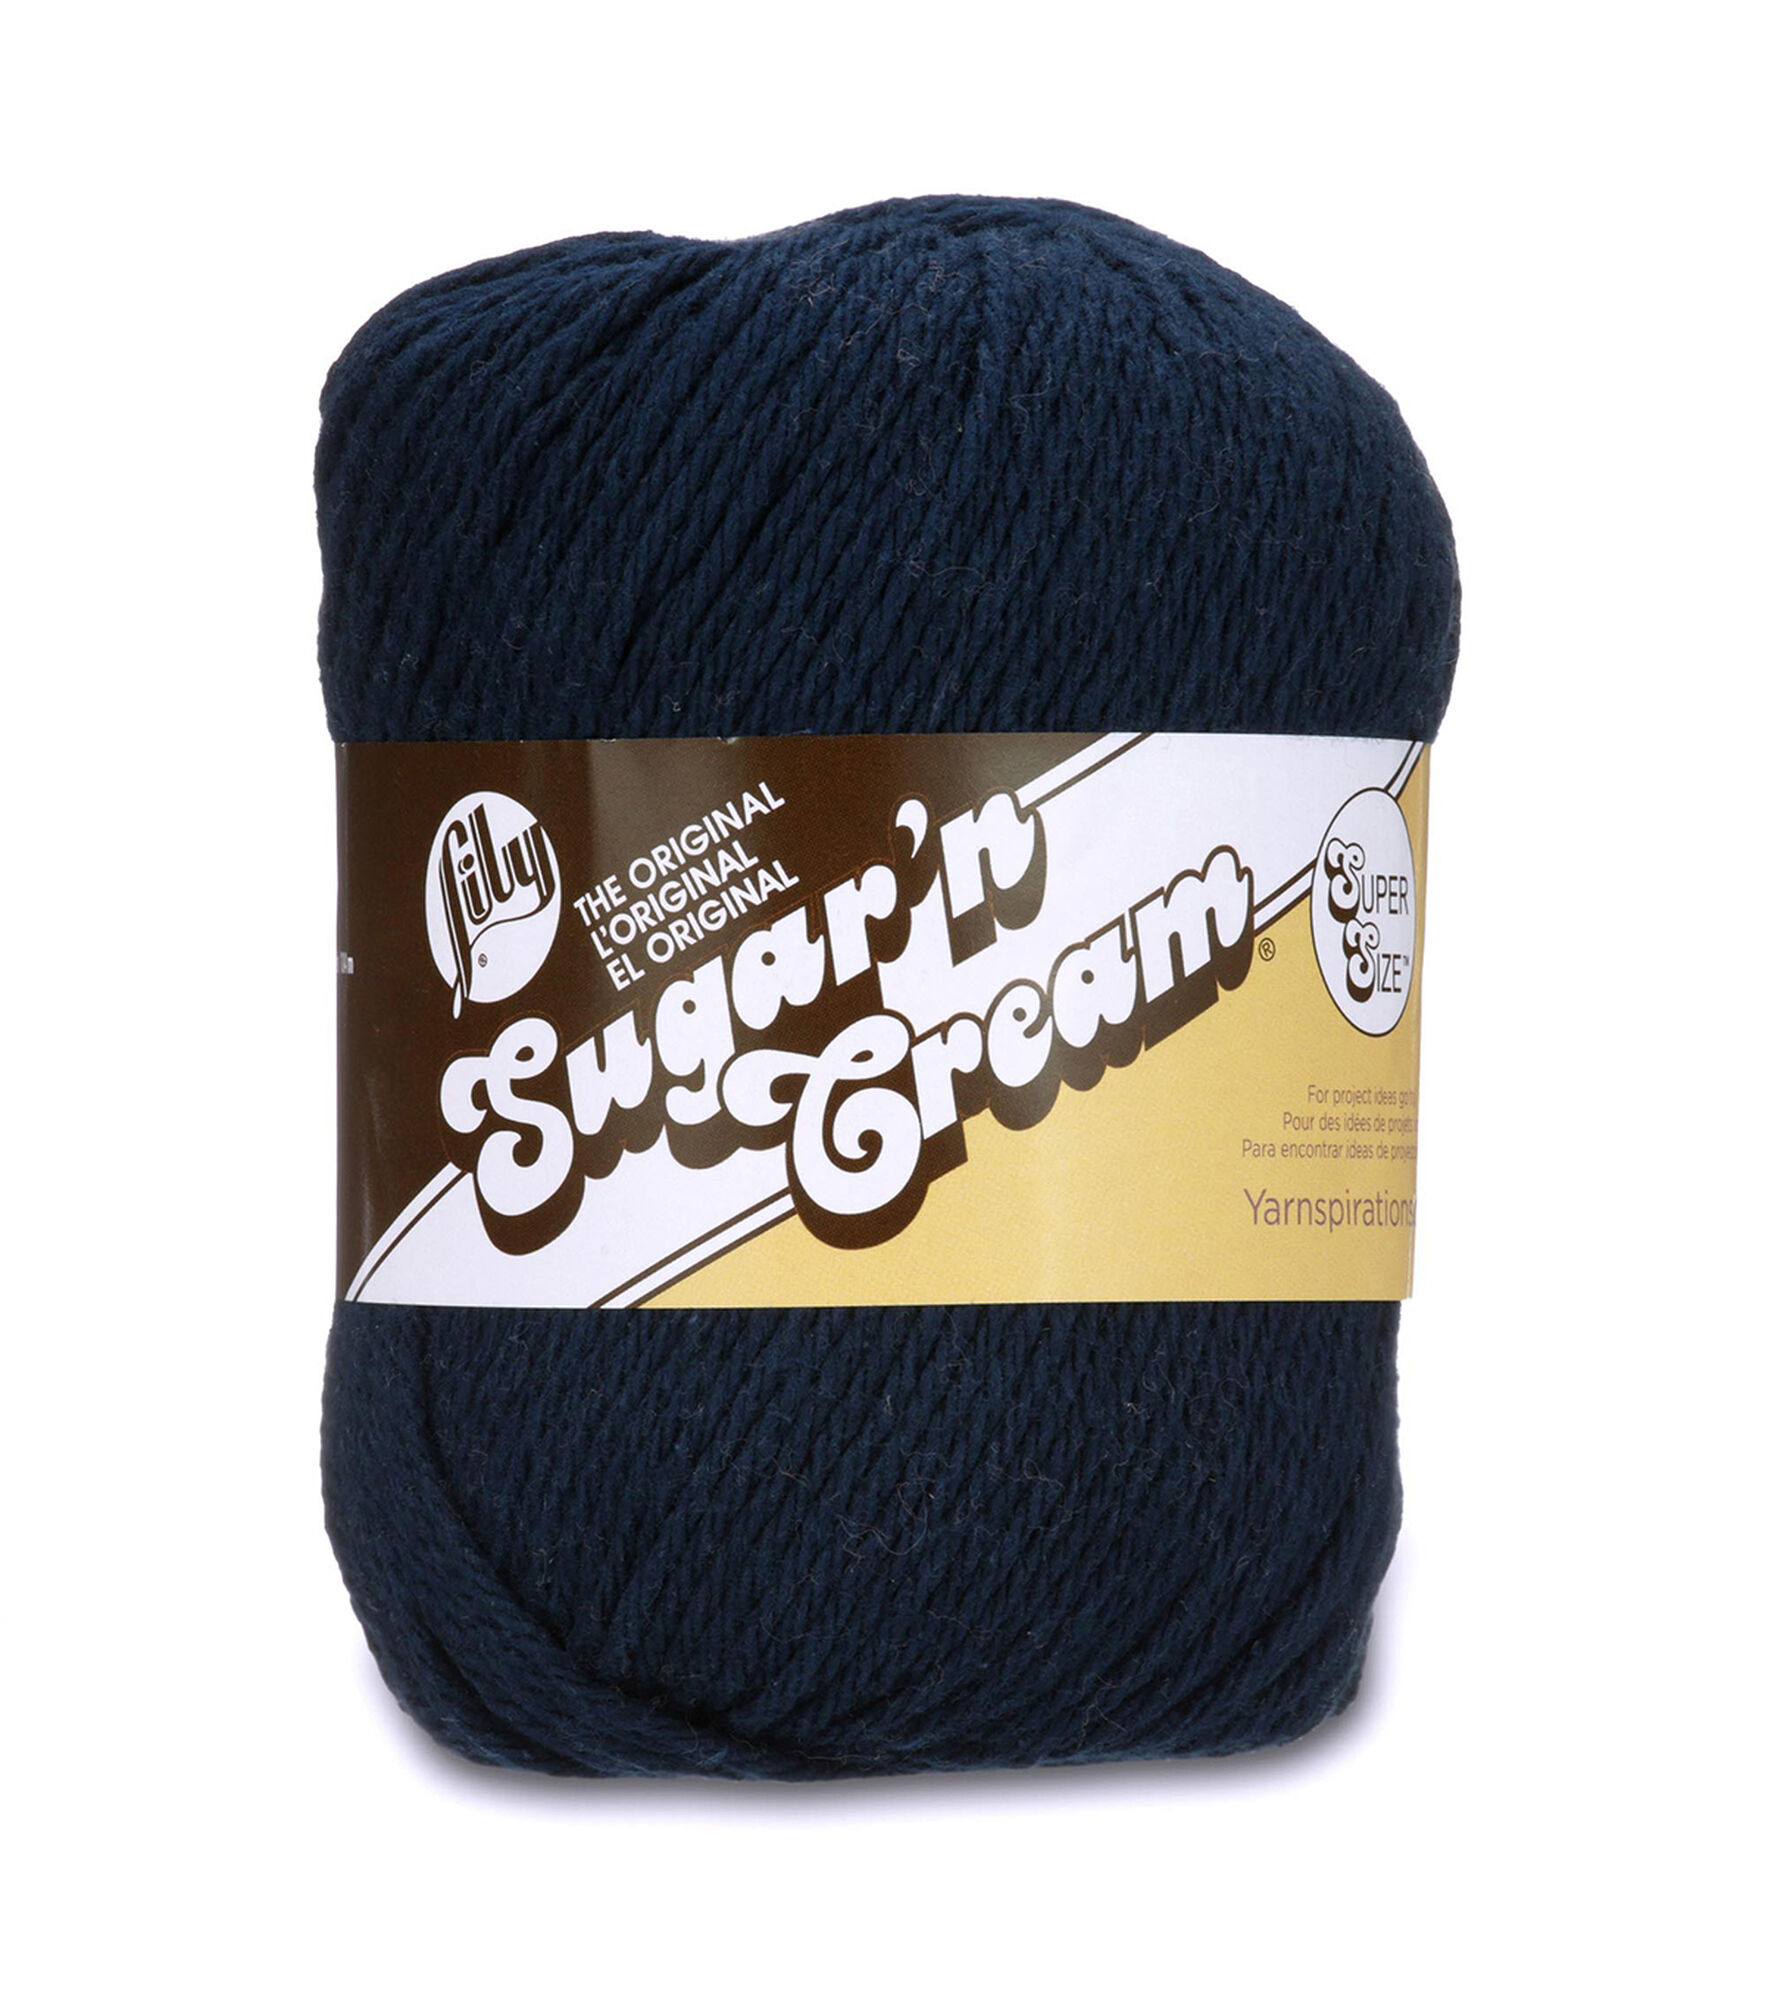 Lily Sugar'n Cream Twists Super Size Worsted Cotton Yarn, Bright Navy, hi-res